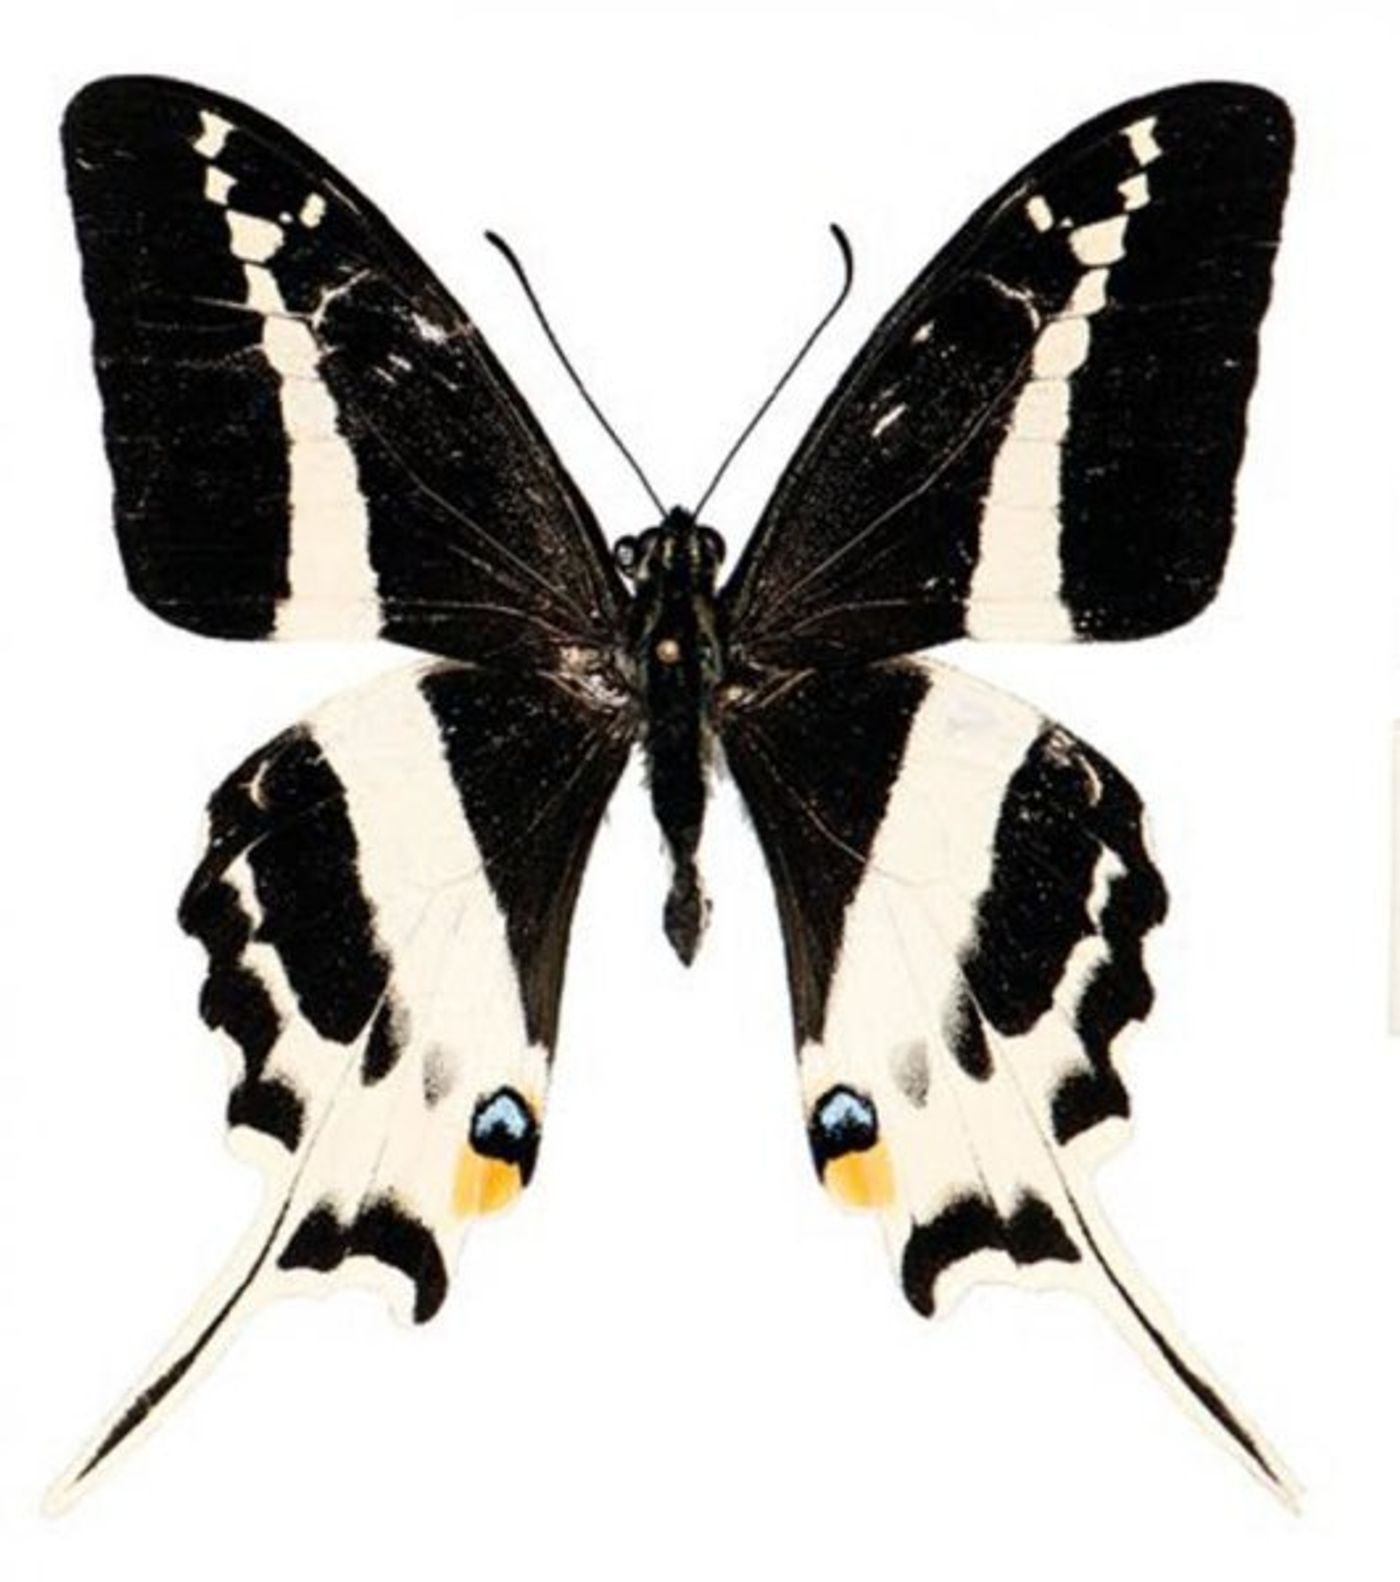 A photograph of the newly-discovered swallowtail butterfly.